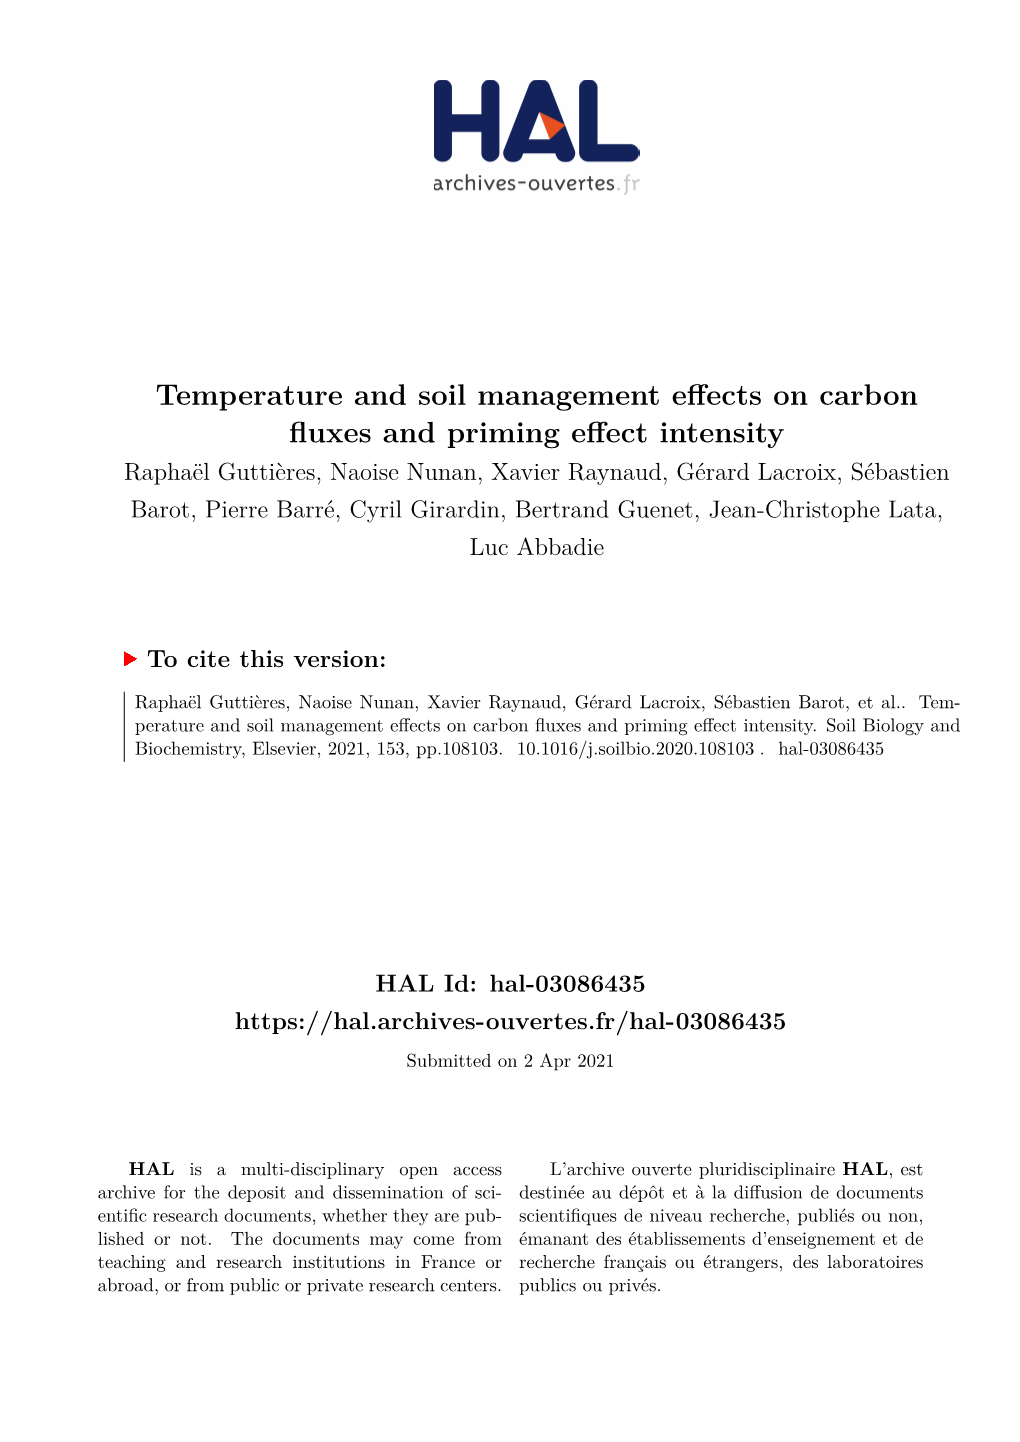 Temperature and Soil Management Effects on Carbon Fluxes and Priming Effect Intensity